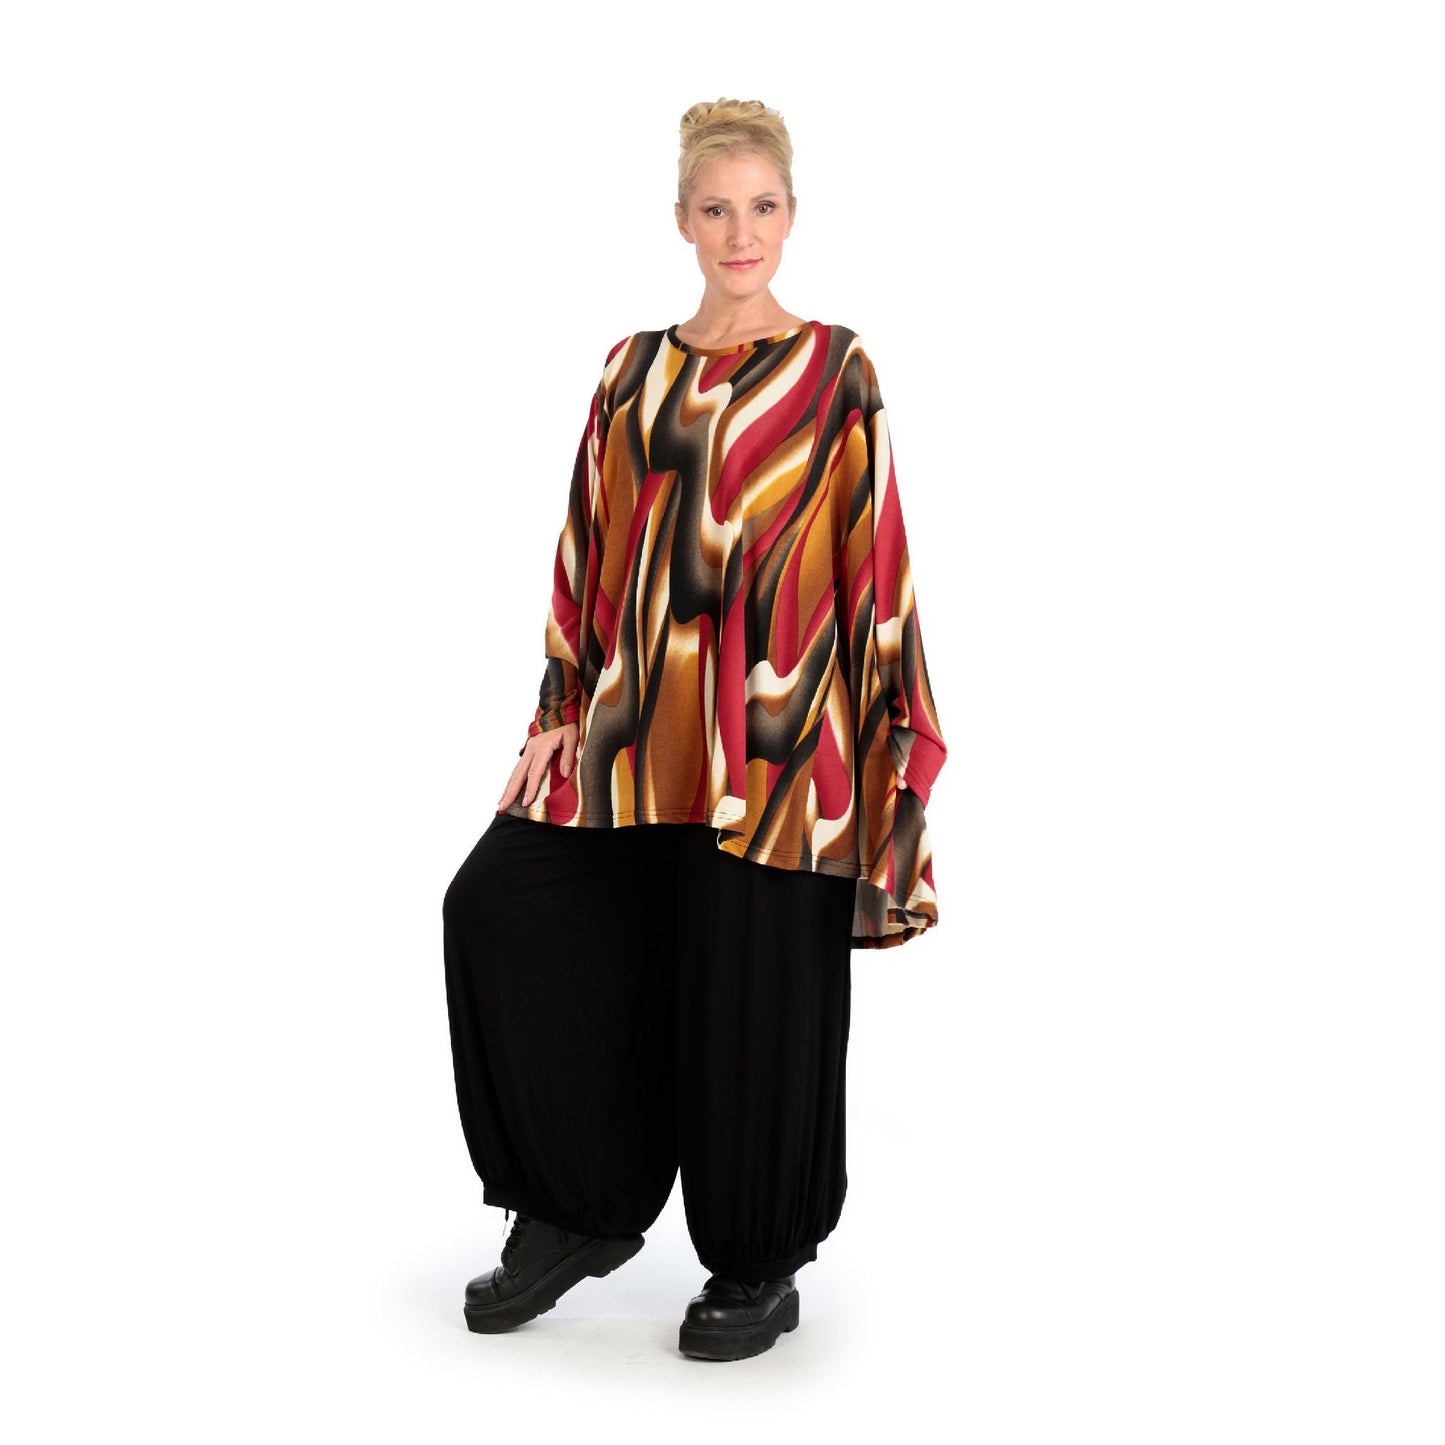 Winter big shirt in A-shape made of soft fine knit quality, Aurora in cognac-red-white